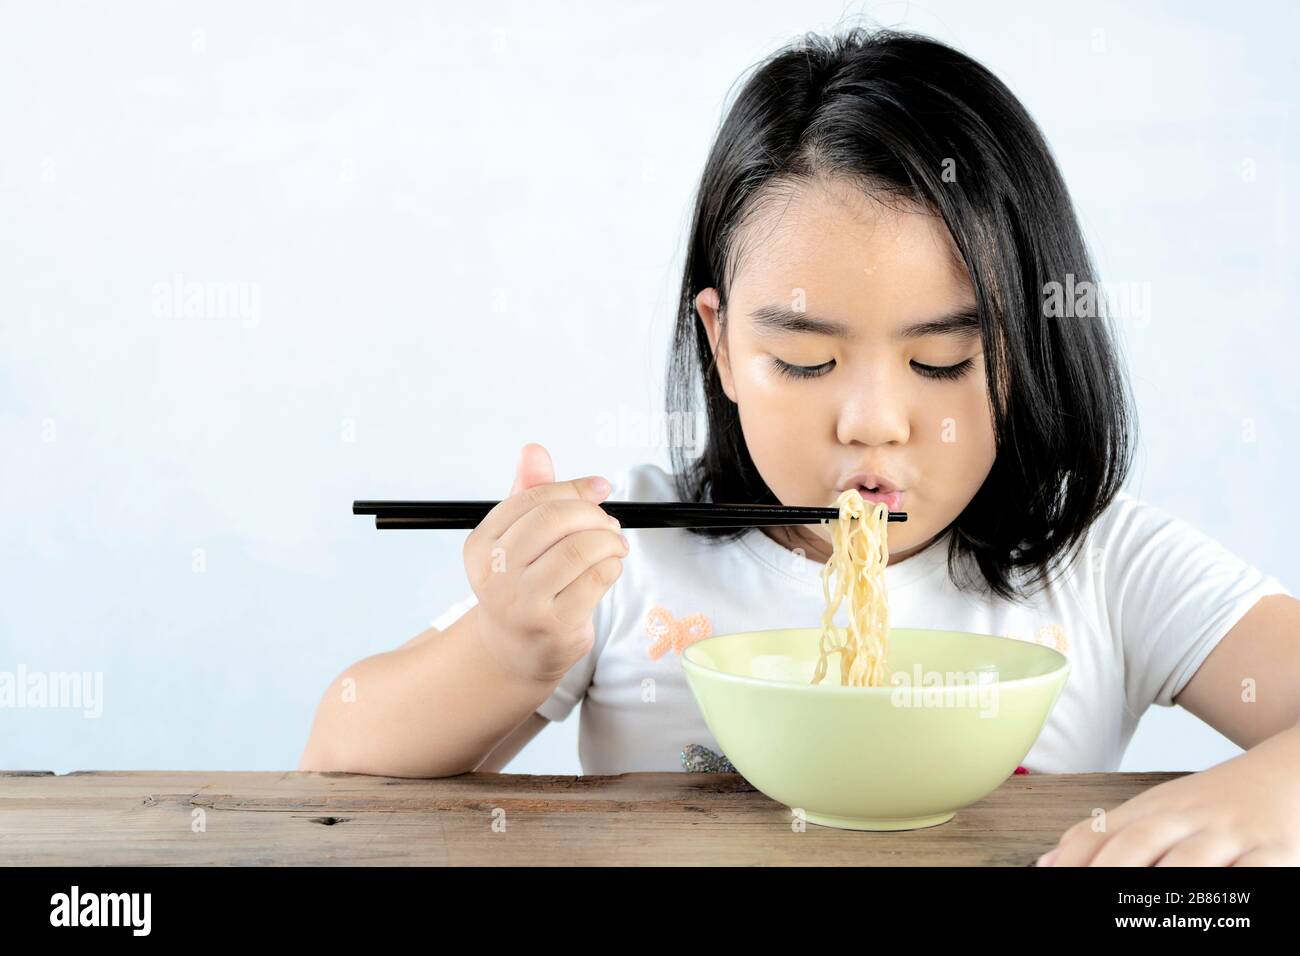 Asian girls are blowing instant noodles with a lot of appetite. With her sweat on the forehead, She looks cute and appetizing, a happy child. Stock Photo